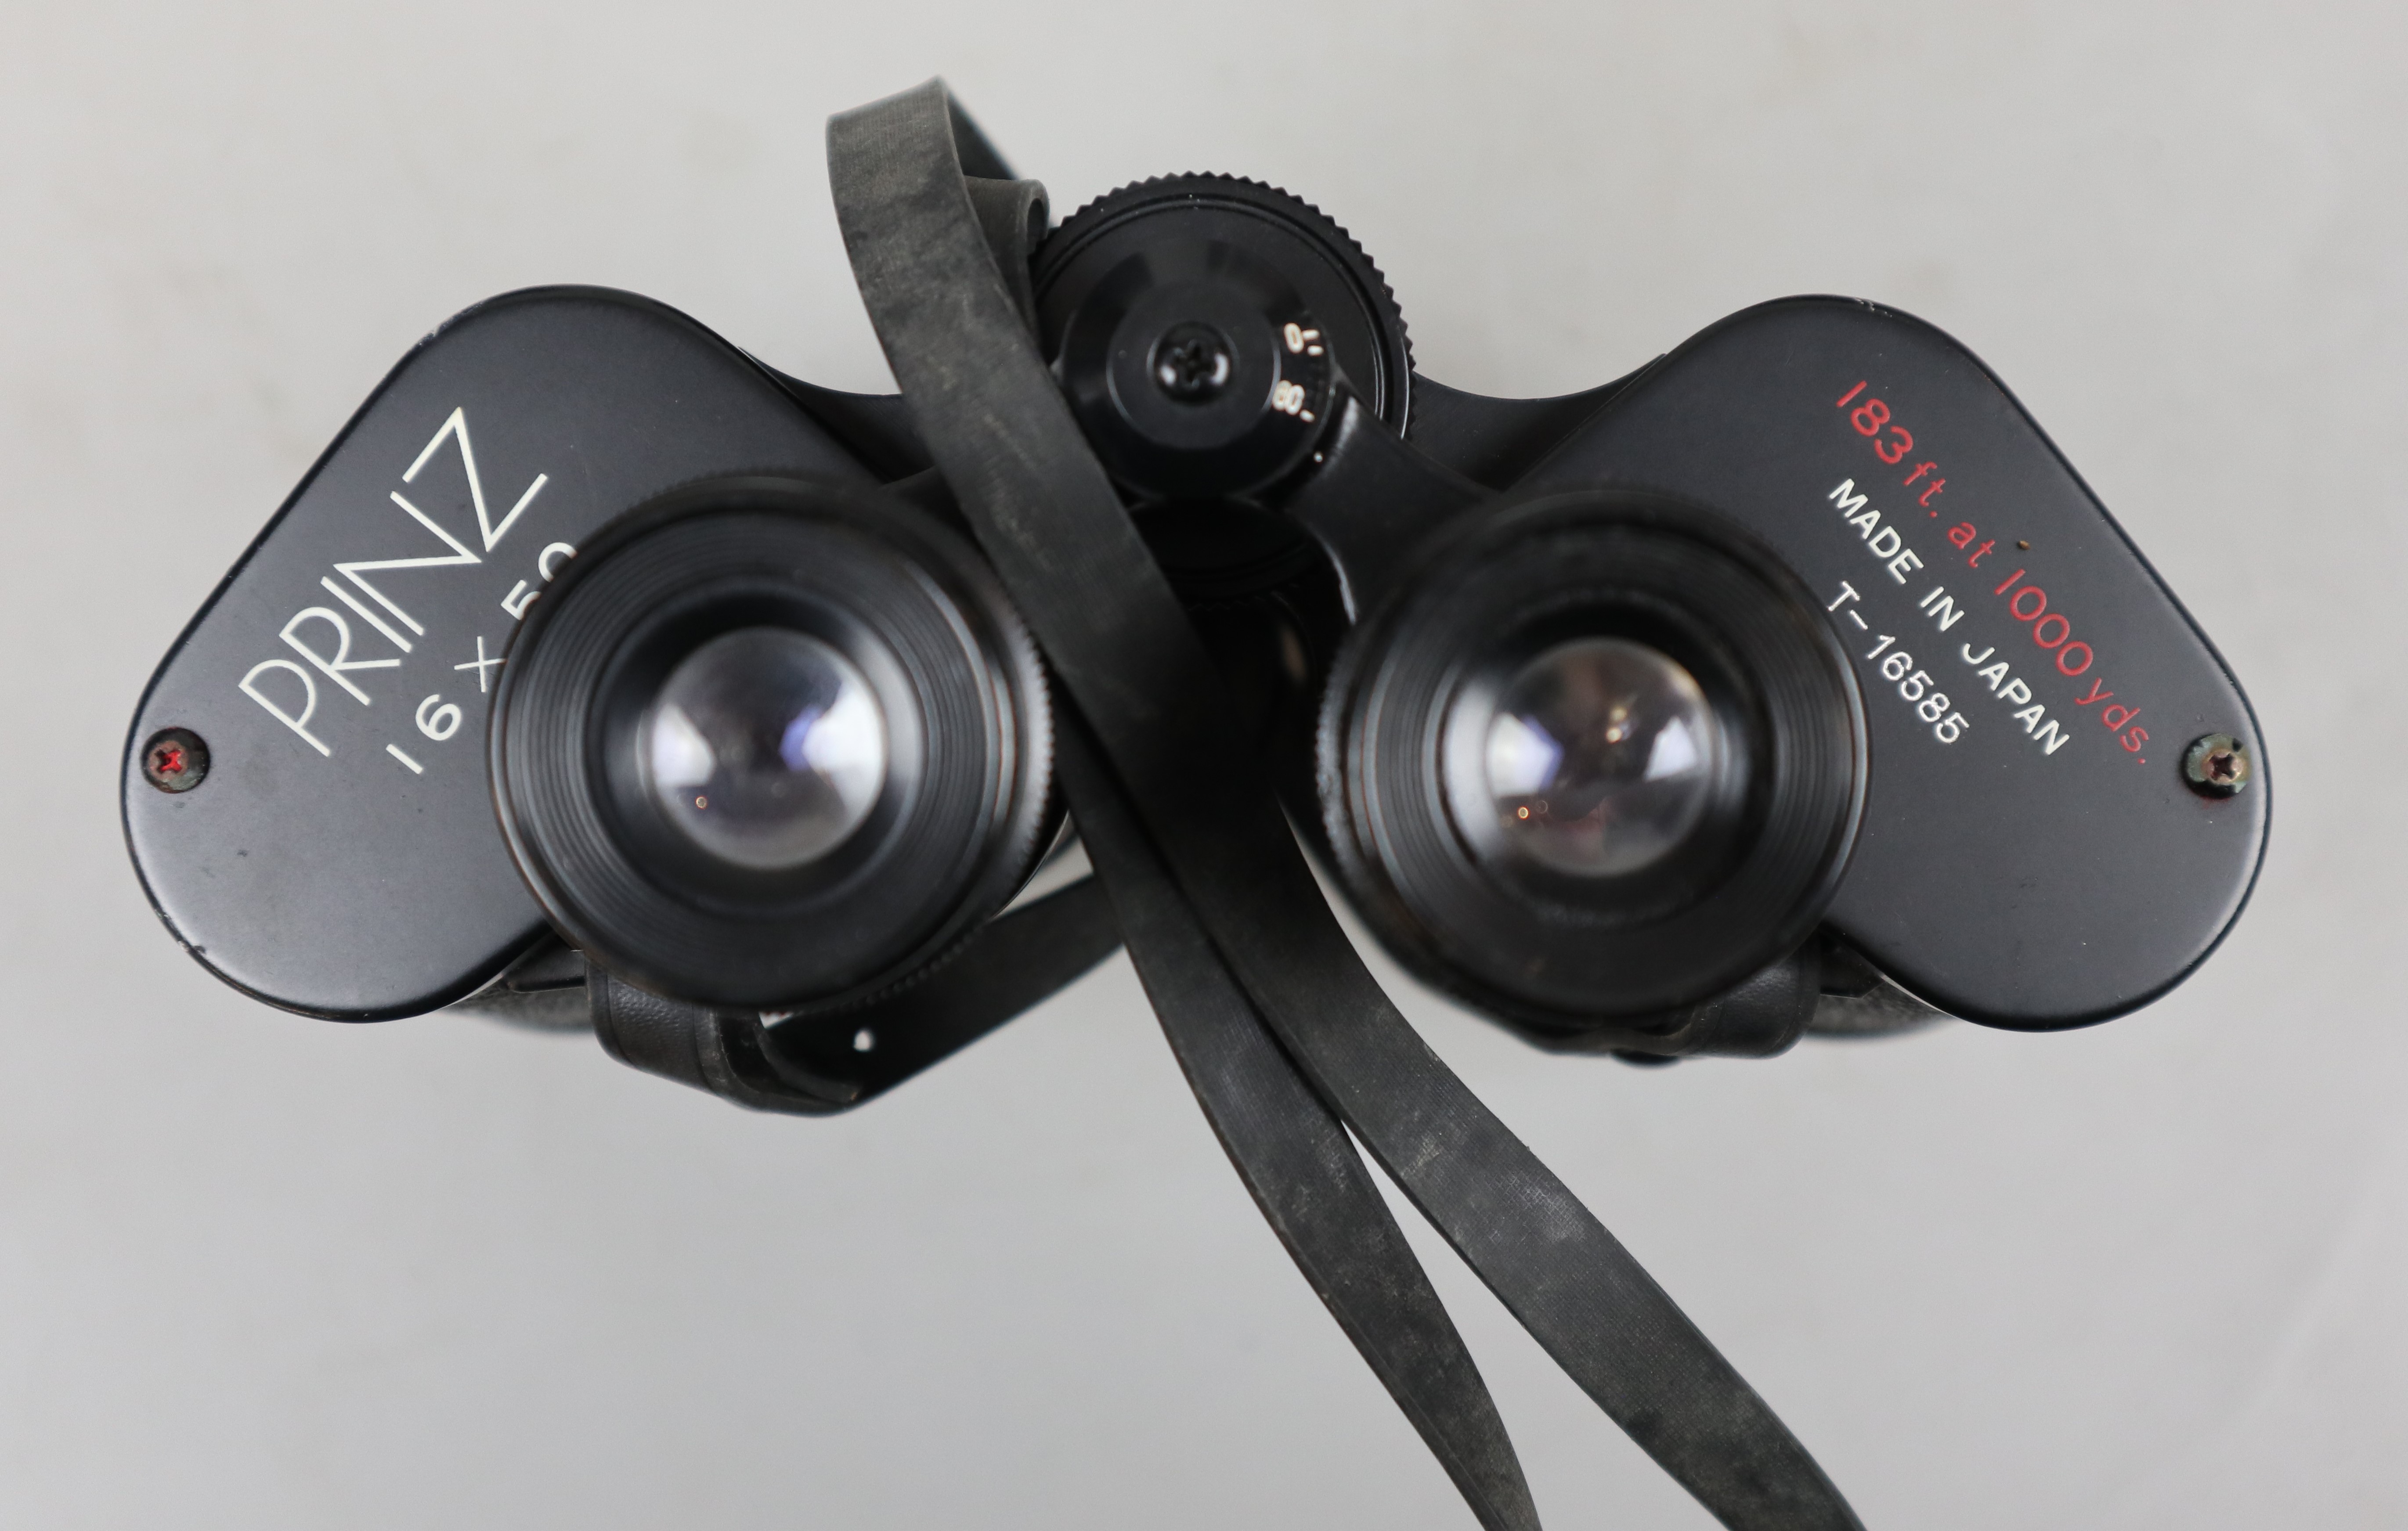 2 sets of Binoculars - Prinz and Boots - Image 2 of 3